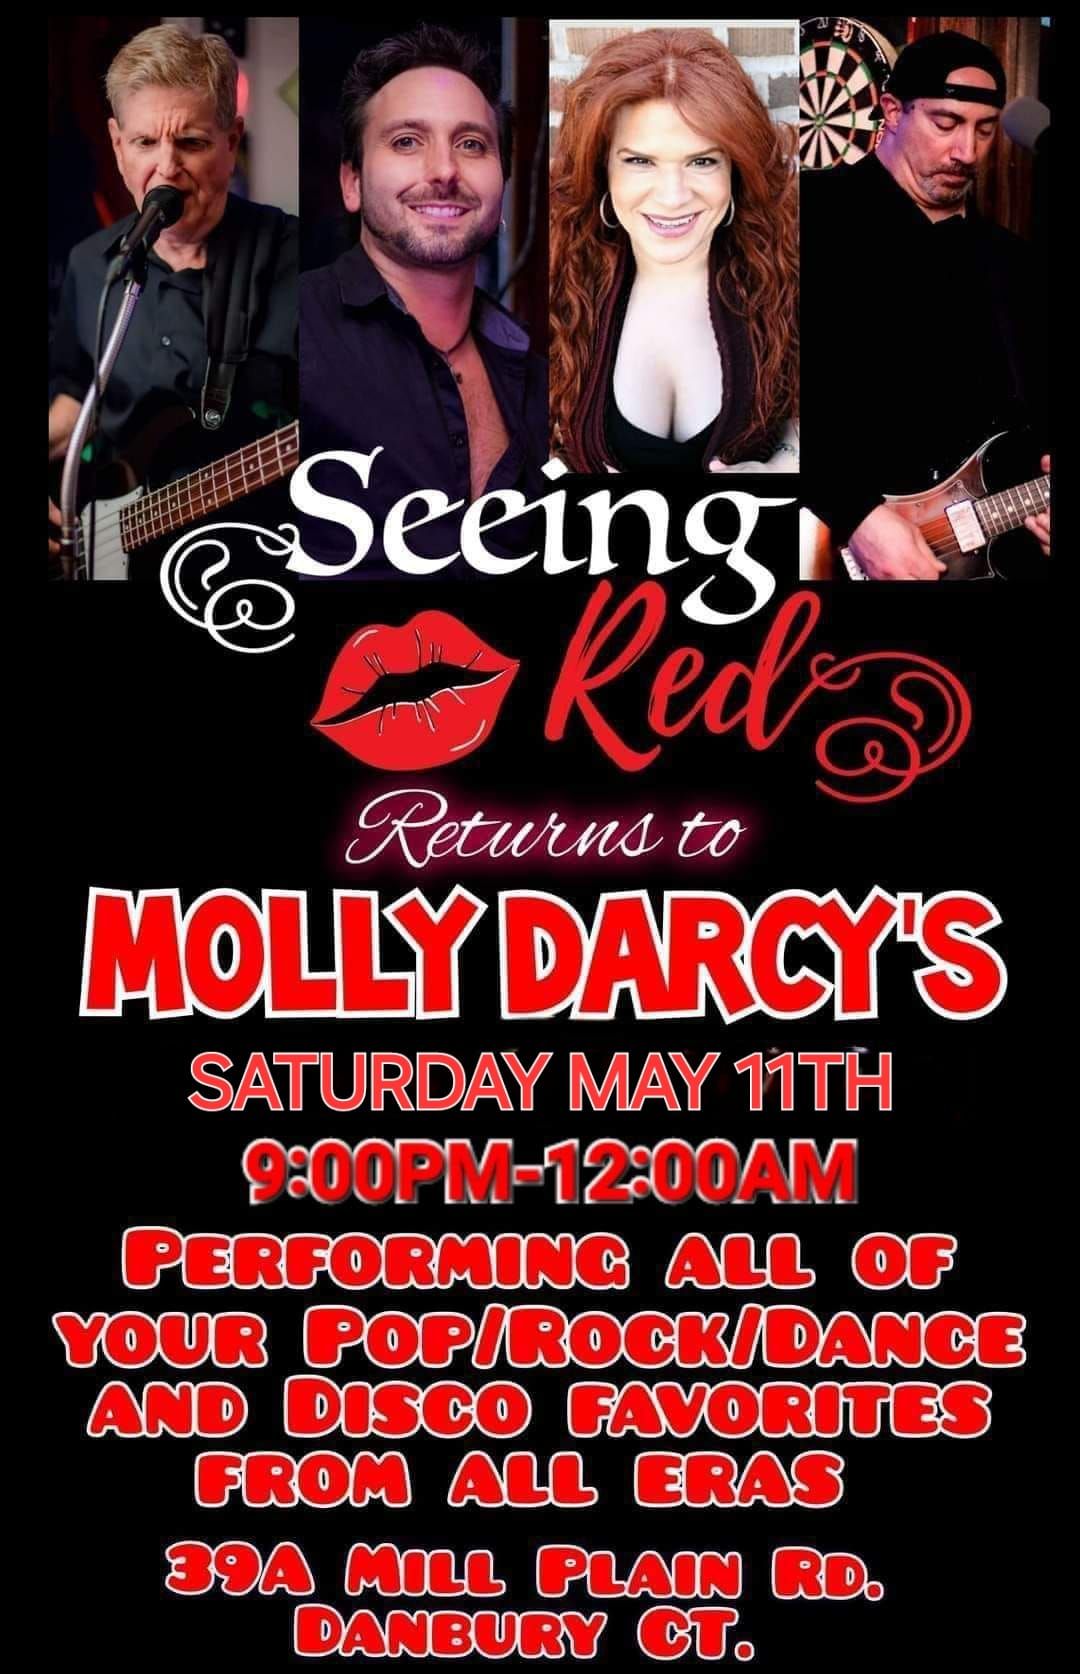 Seeing Red Returns to Molly Darcy's 